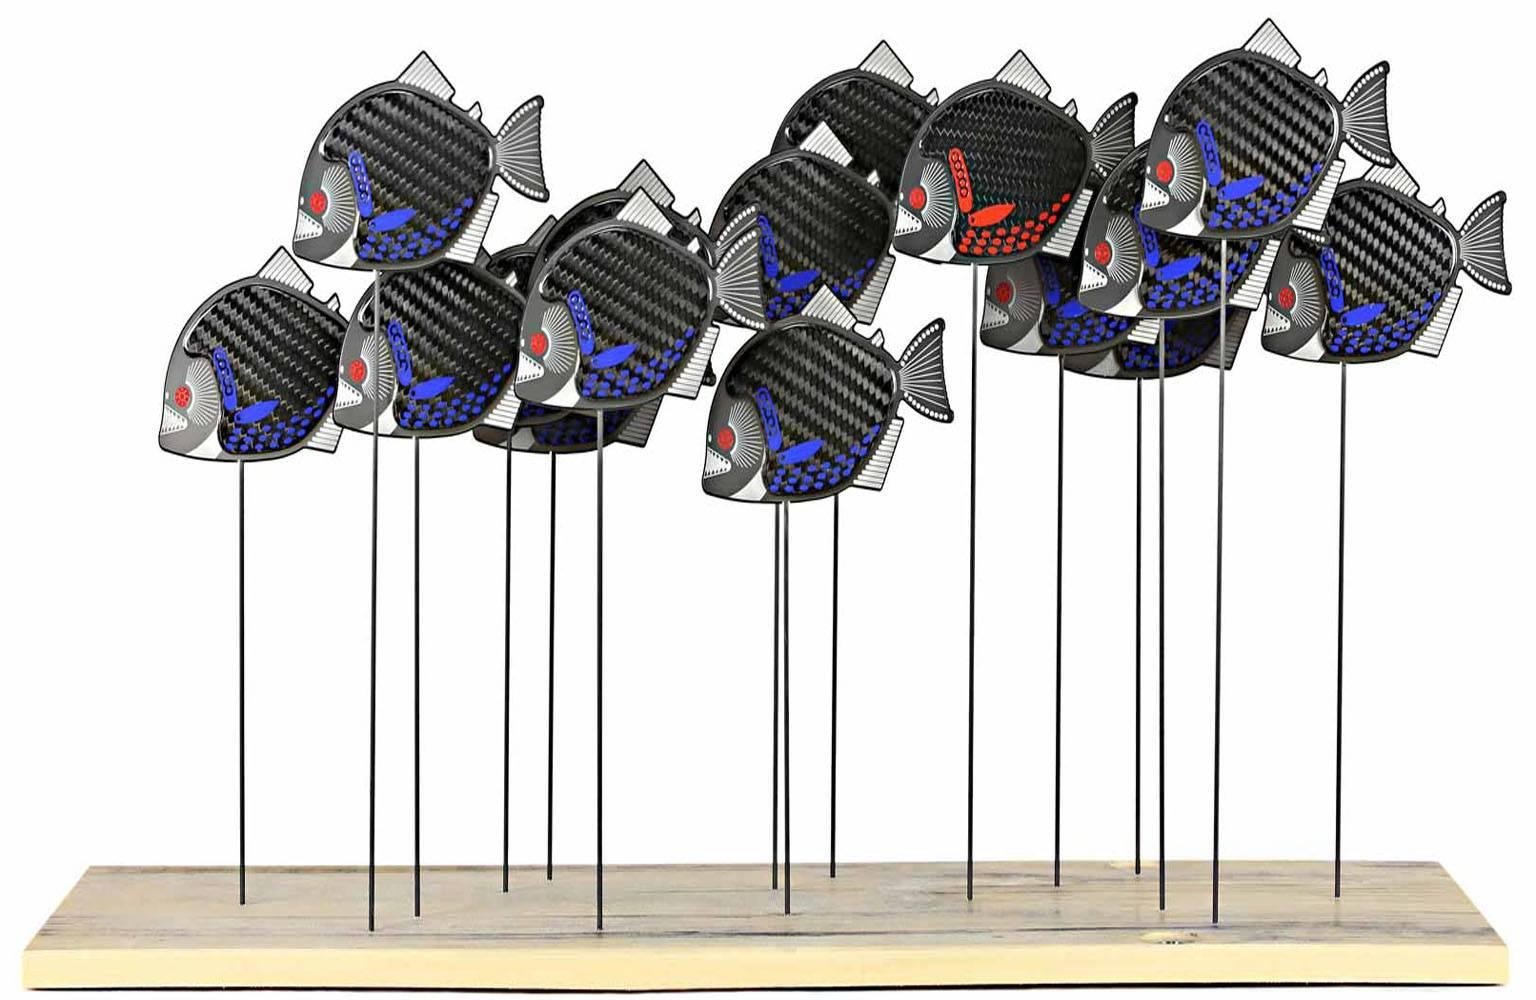 Amazon School by artist Alastair Gibson. This sculpture shows a school of stylised racing piranha fish mounted on a used FIA legality perma-glass underfloor plank. The sculpture is limited to 25 pieces and signed and editioned by the artist on